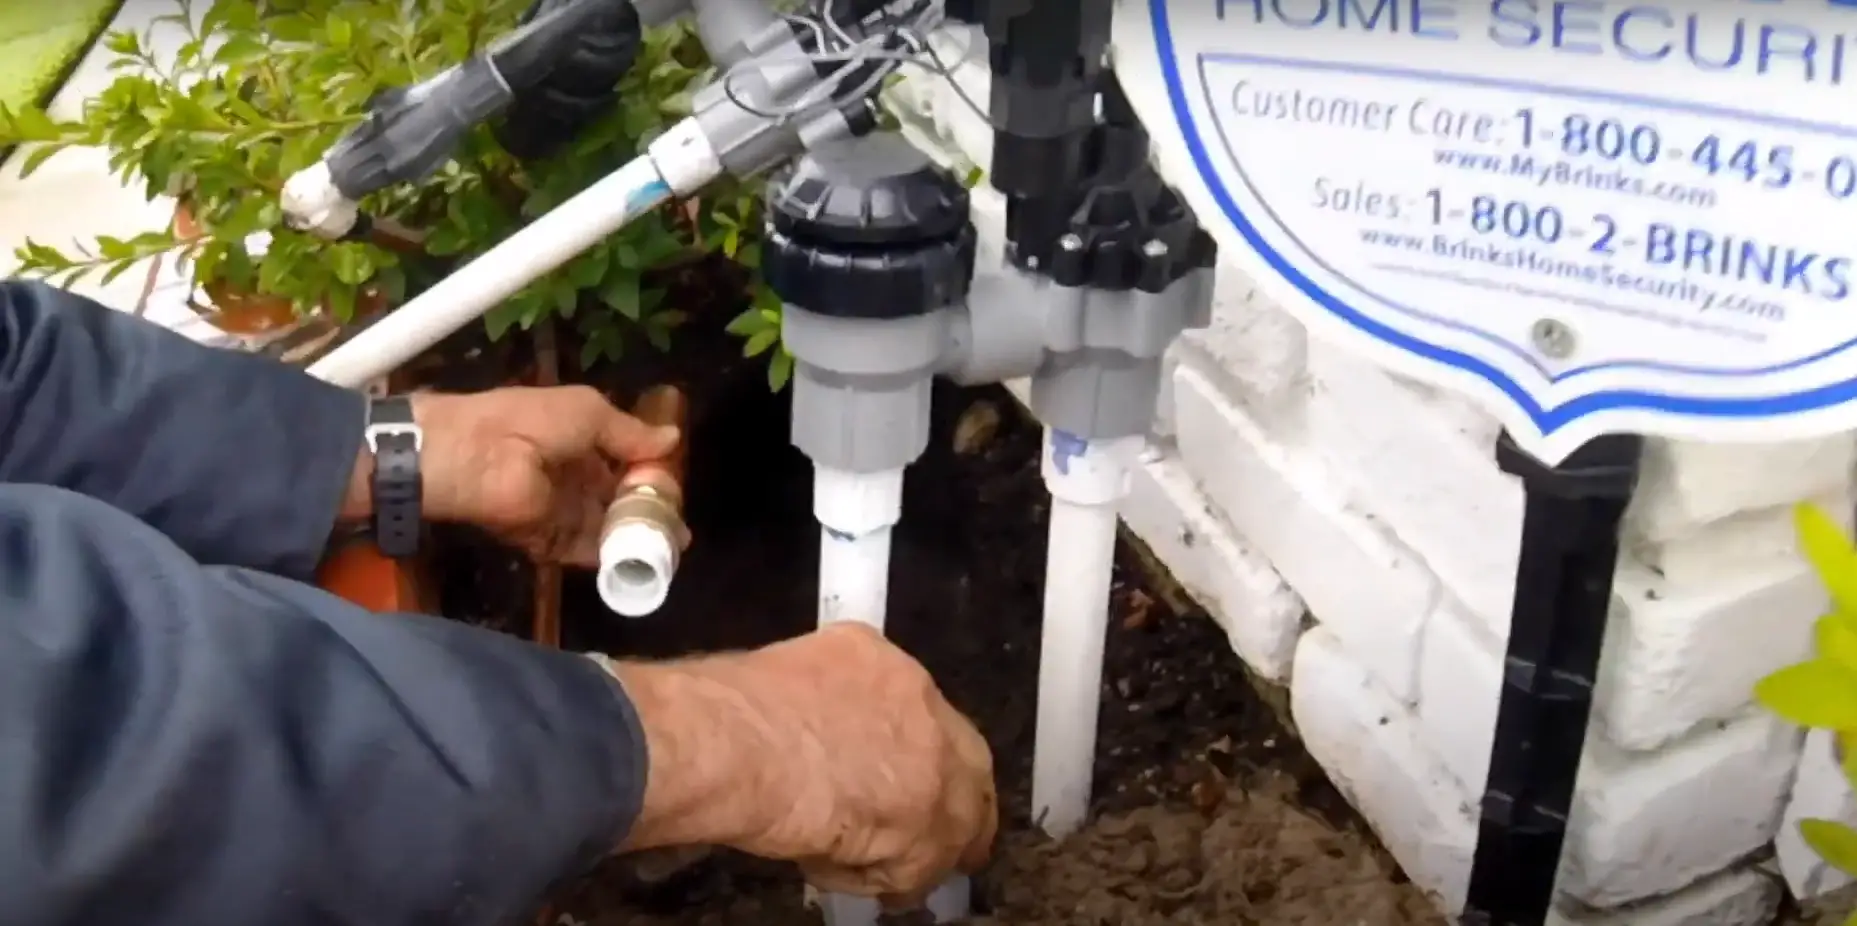 How Do You Clean The Inside Of A Sprinkler Head?